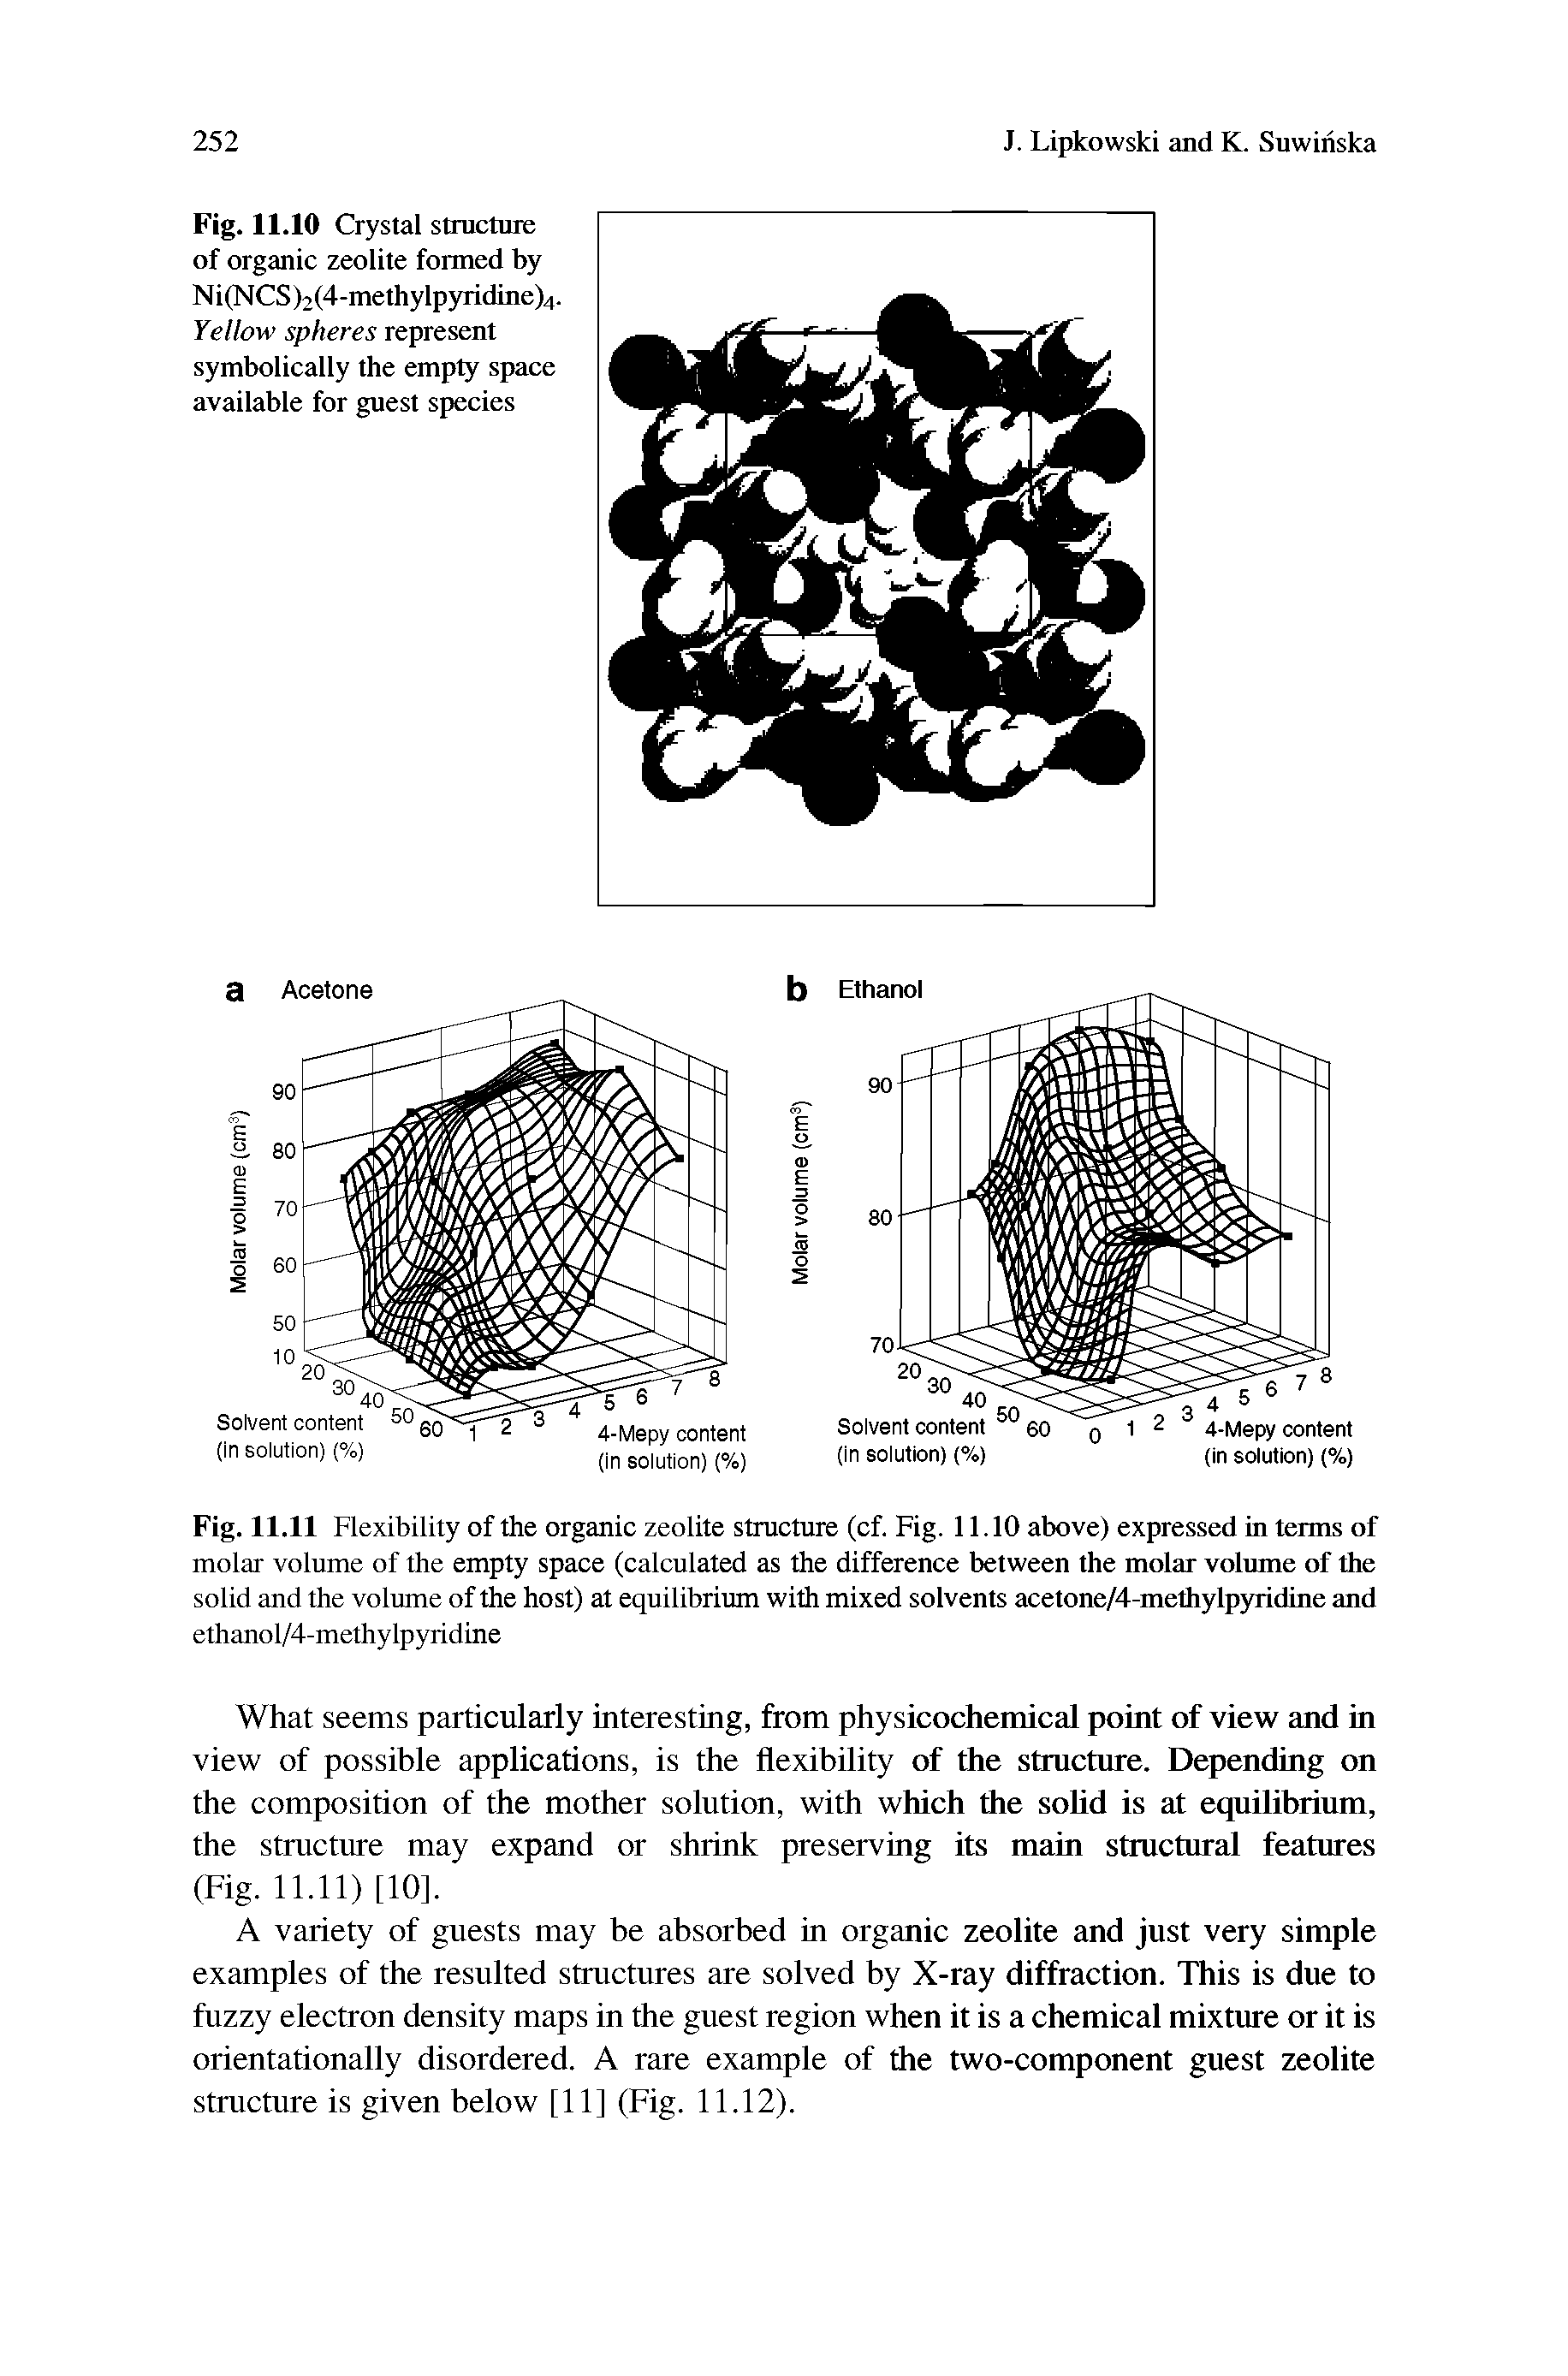 Fig. 11.11 Flexibility of the organic zeolite structure (cf. Fig. 11.10 above) expressed in terms of molar volume of the empty space (calculated as the difference between the molar volume of the solid and the volume of the host) at equilibrium with mixed solvents acetone/4-methylpyridine and ethanol/4-methylpyridine...